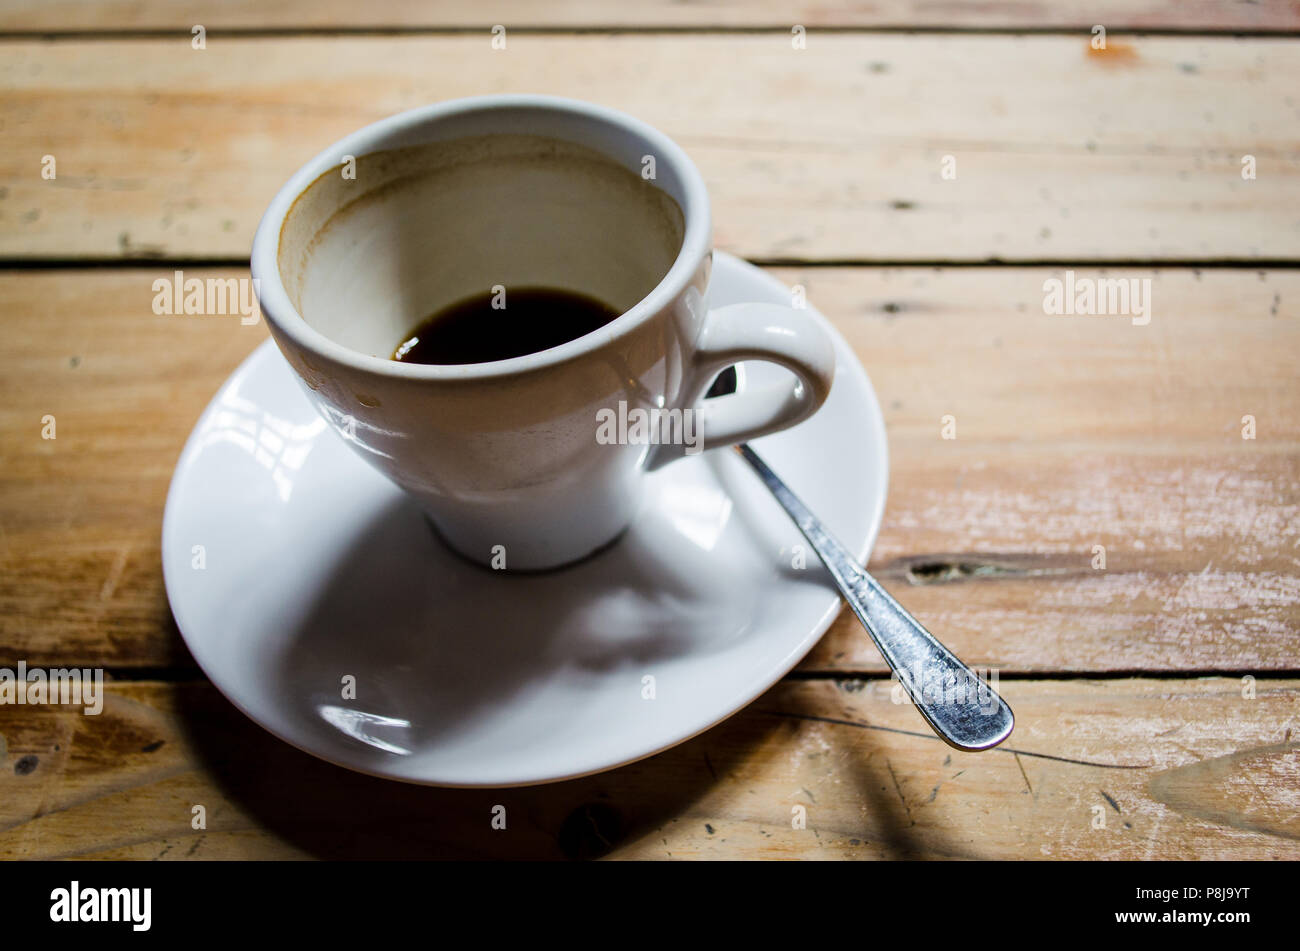 Single white ceramic half full coffee cup and saucer on a rustic wooden table. Stock Photo